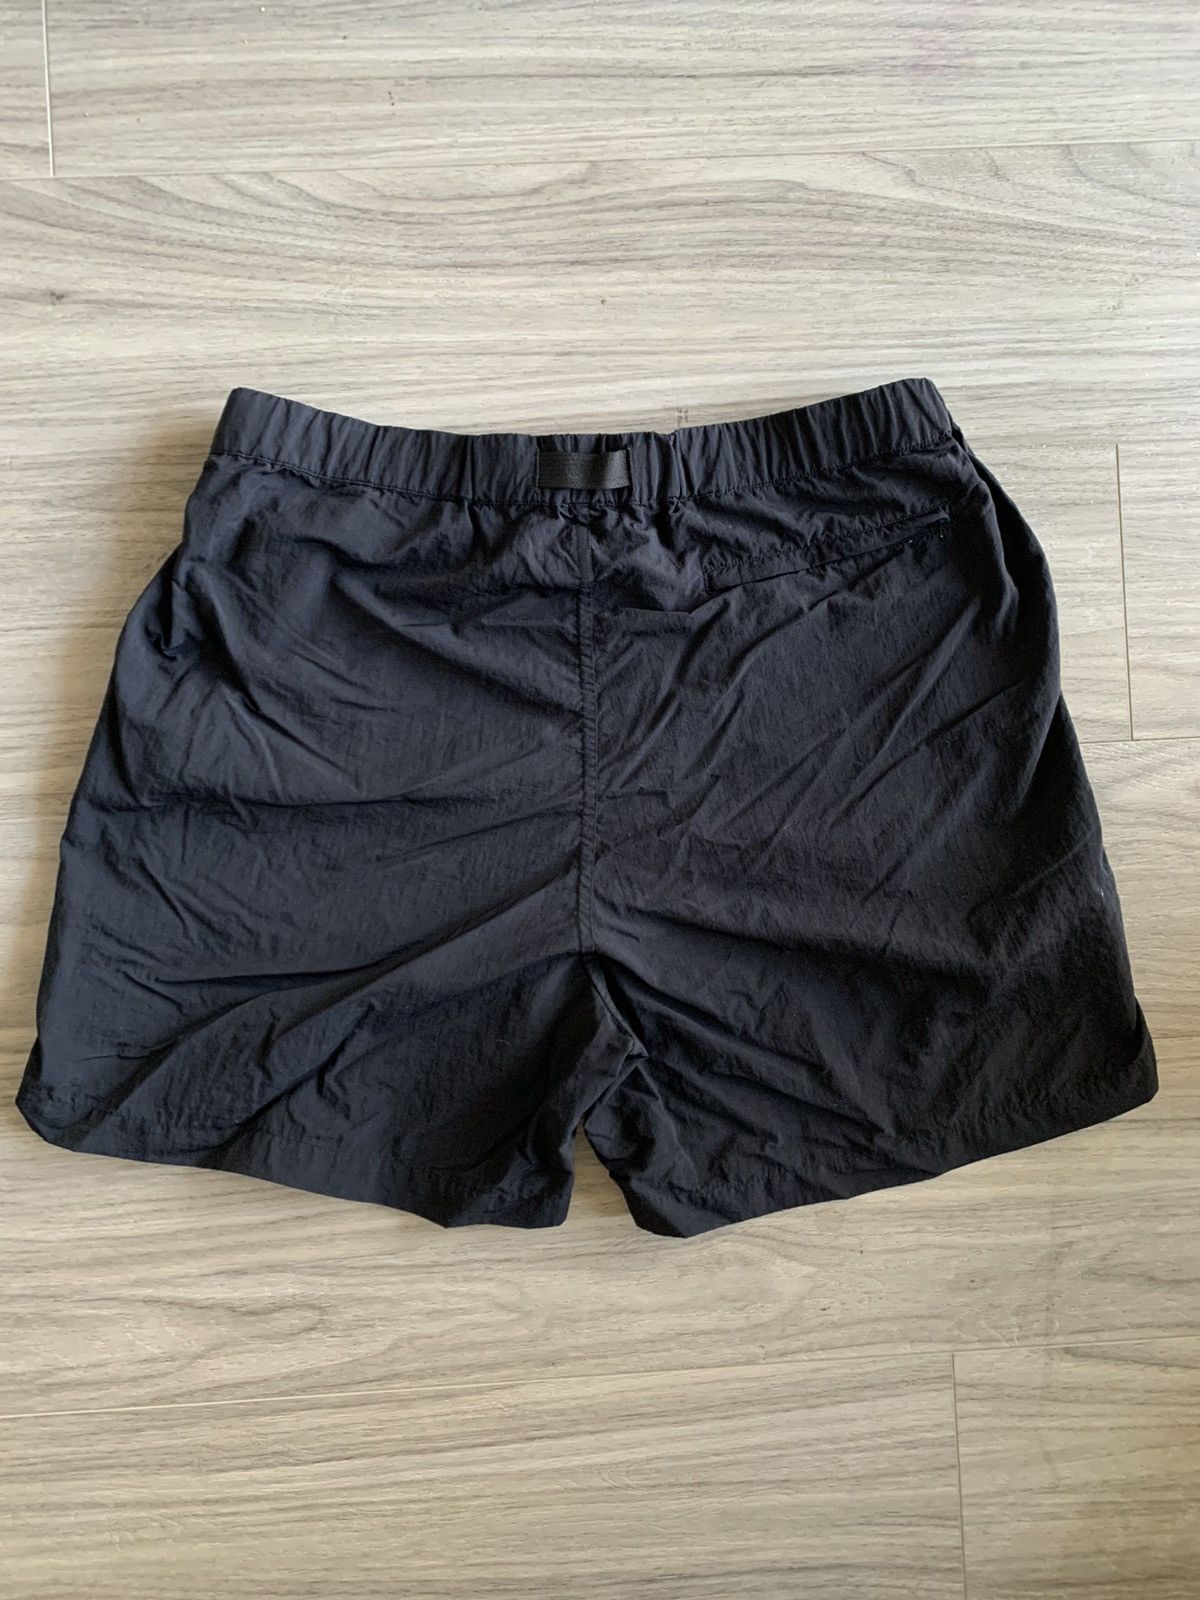 Standard Issue Nyc Standard Issue Tees Black AT Shorts Size US 34 / EU 50 - 2 Preview